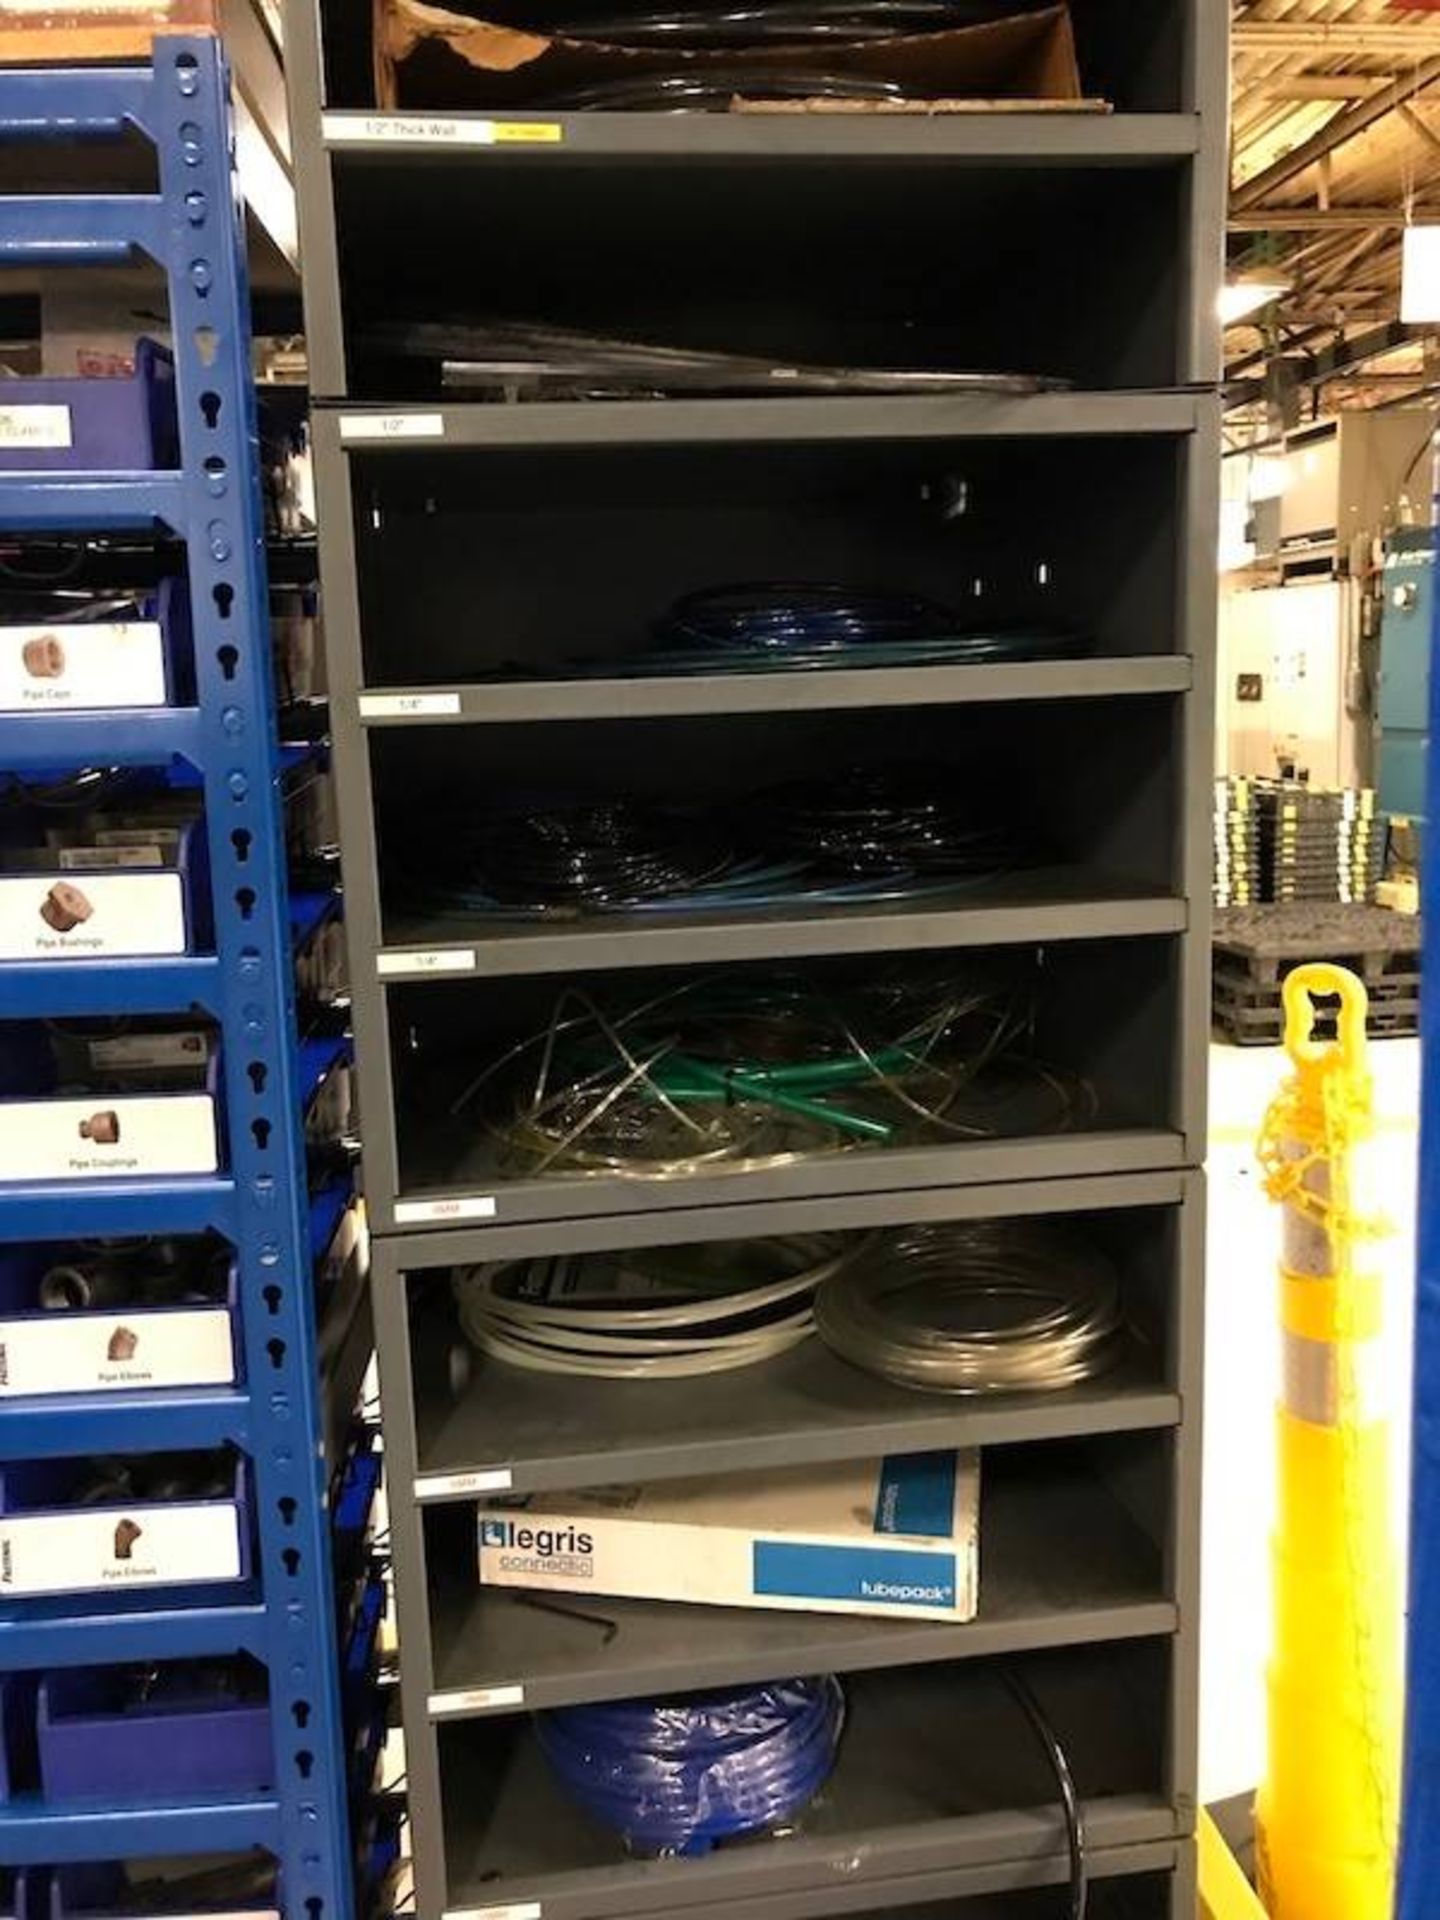 Contents of Fastenal Parts Bins - Image 61 of 70